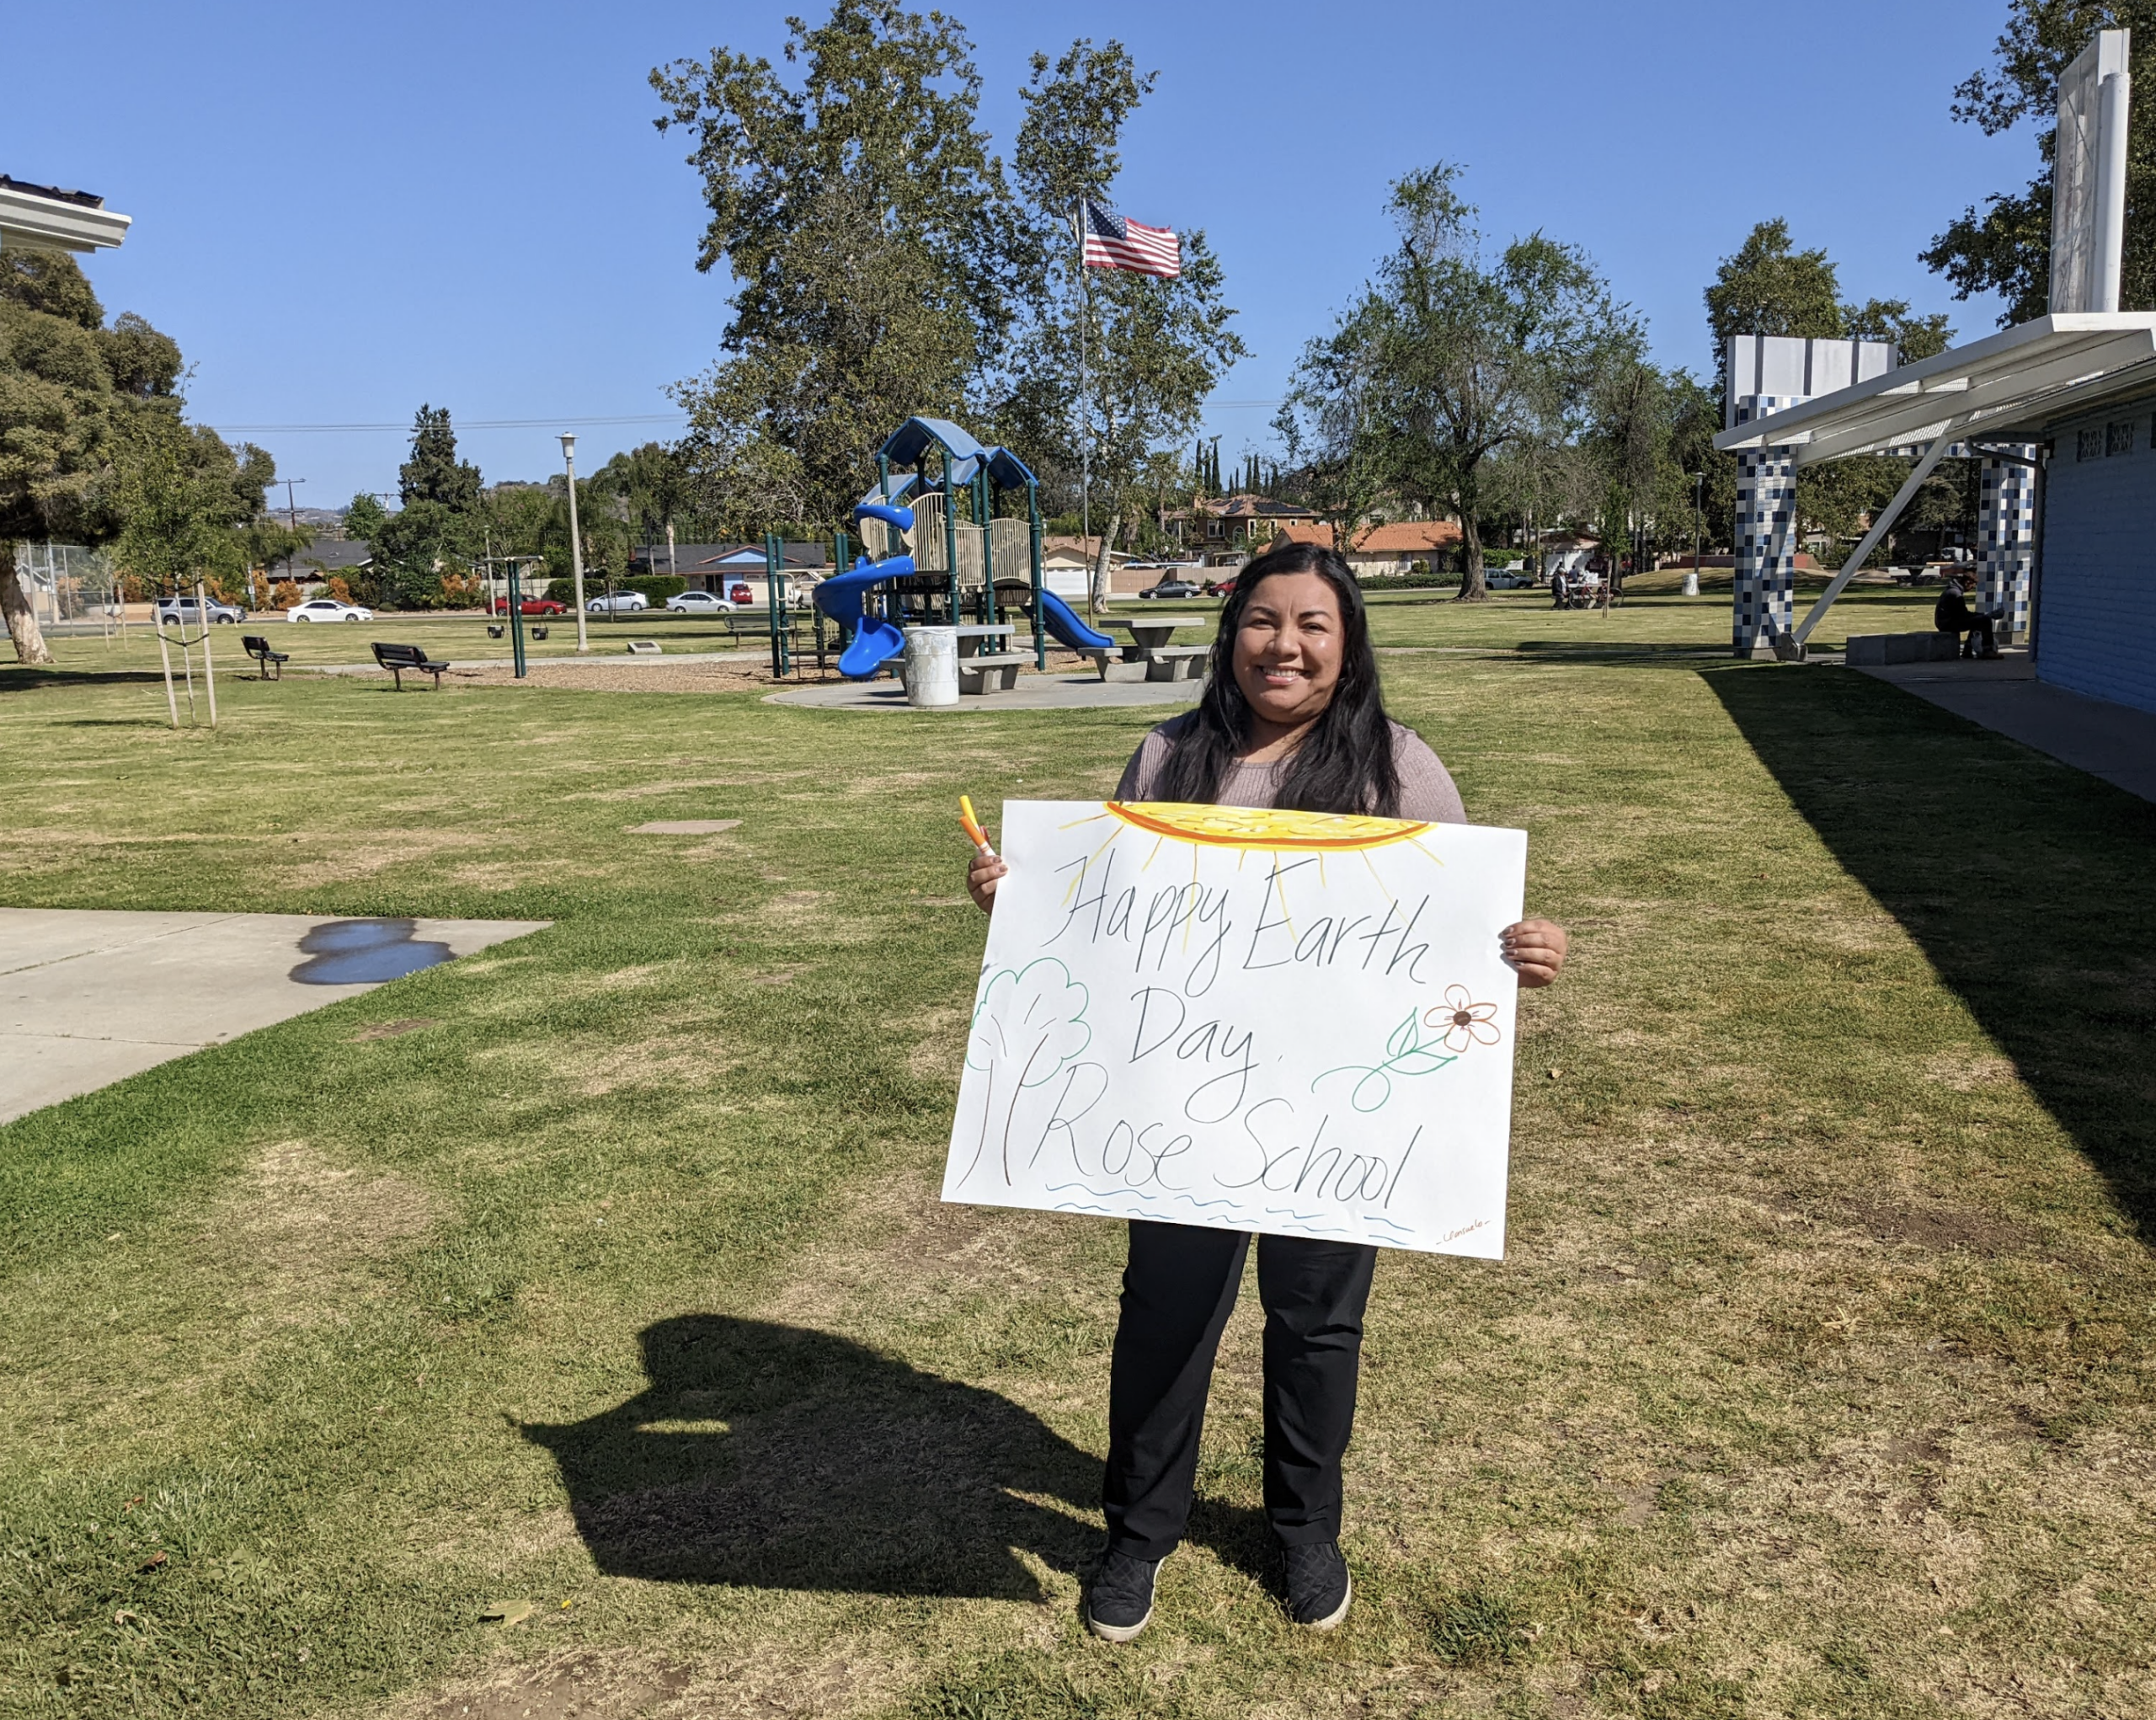 A women holds an Earth Day sign in the park